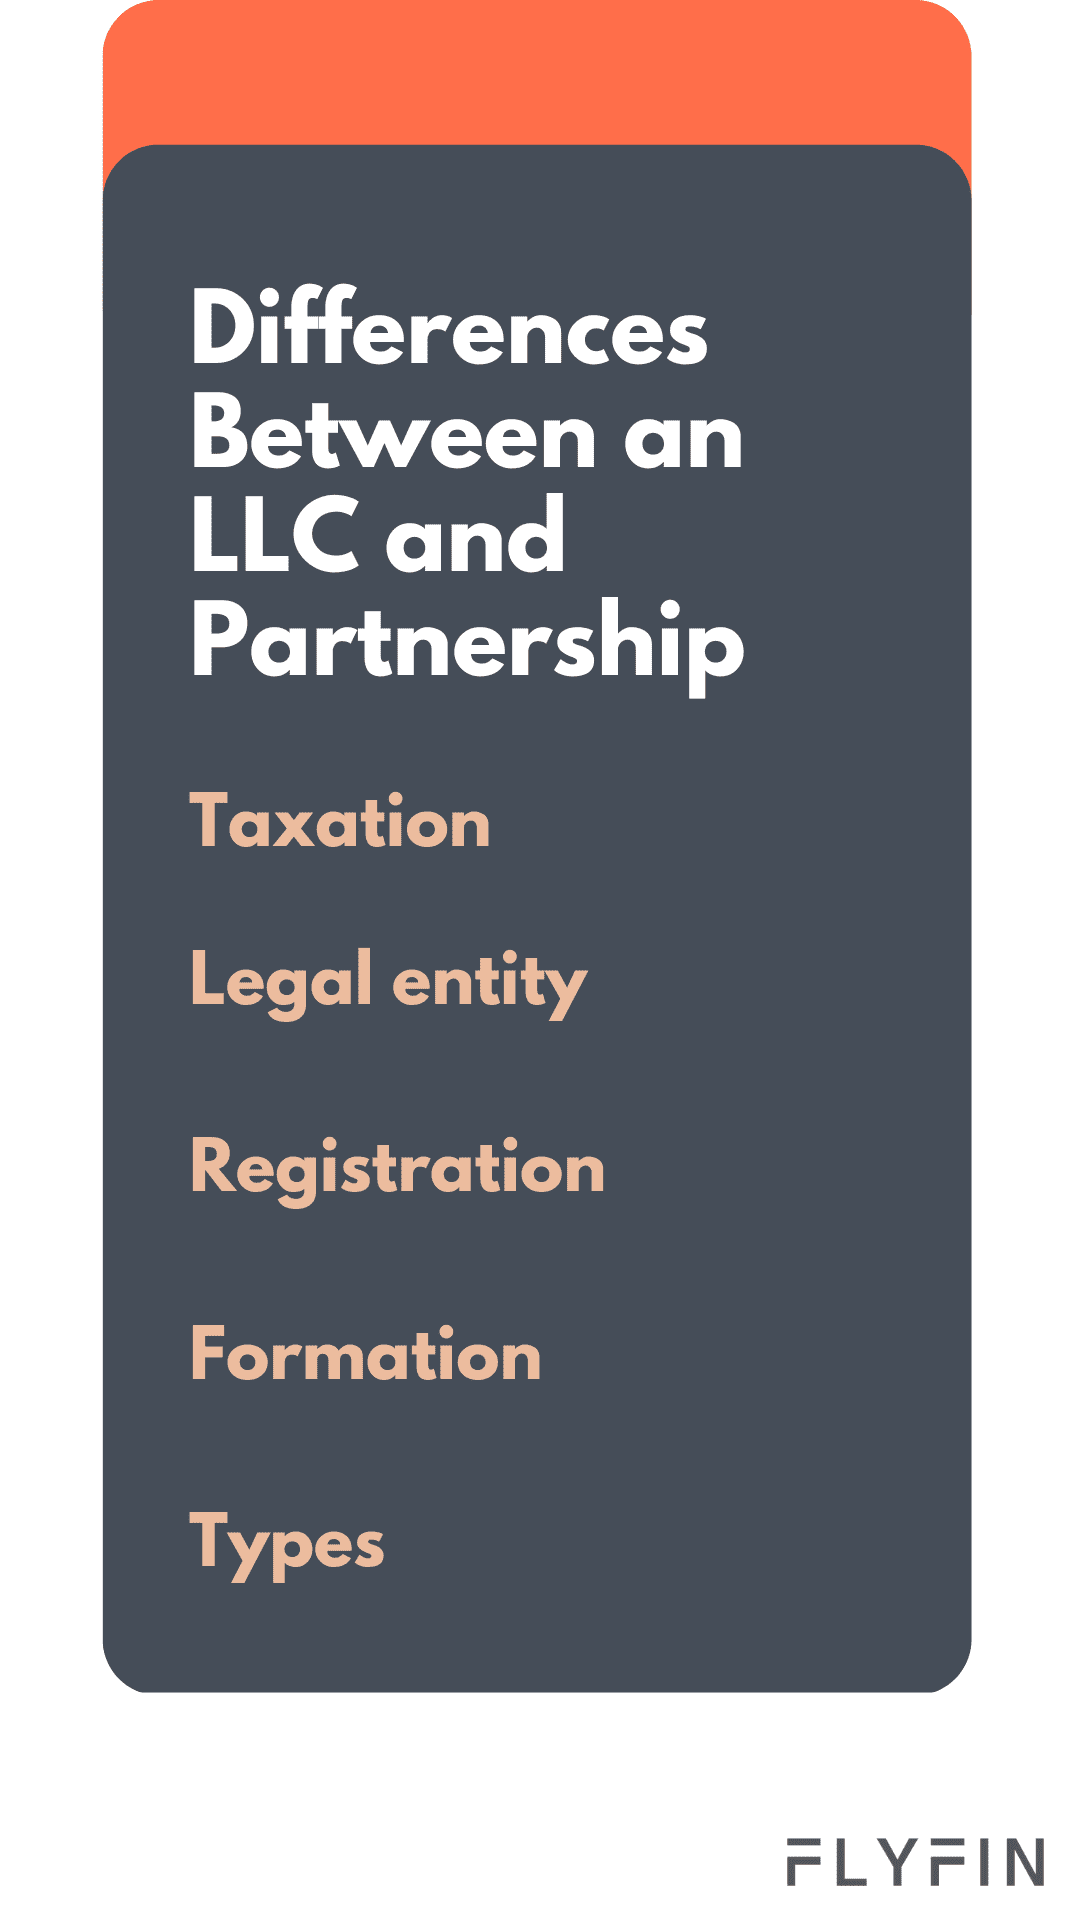 Image comparing LLC and Partnership on taxation, registration, legal entity, types, and formation. No mention of self-employed, 1099, freelancer, or taxes.